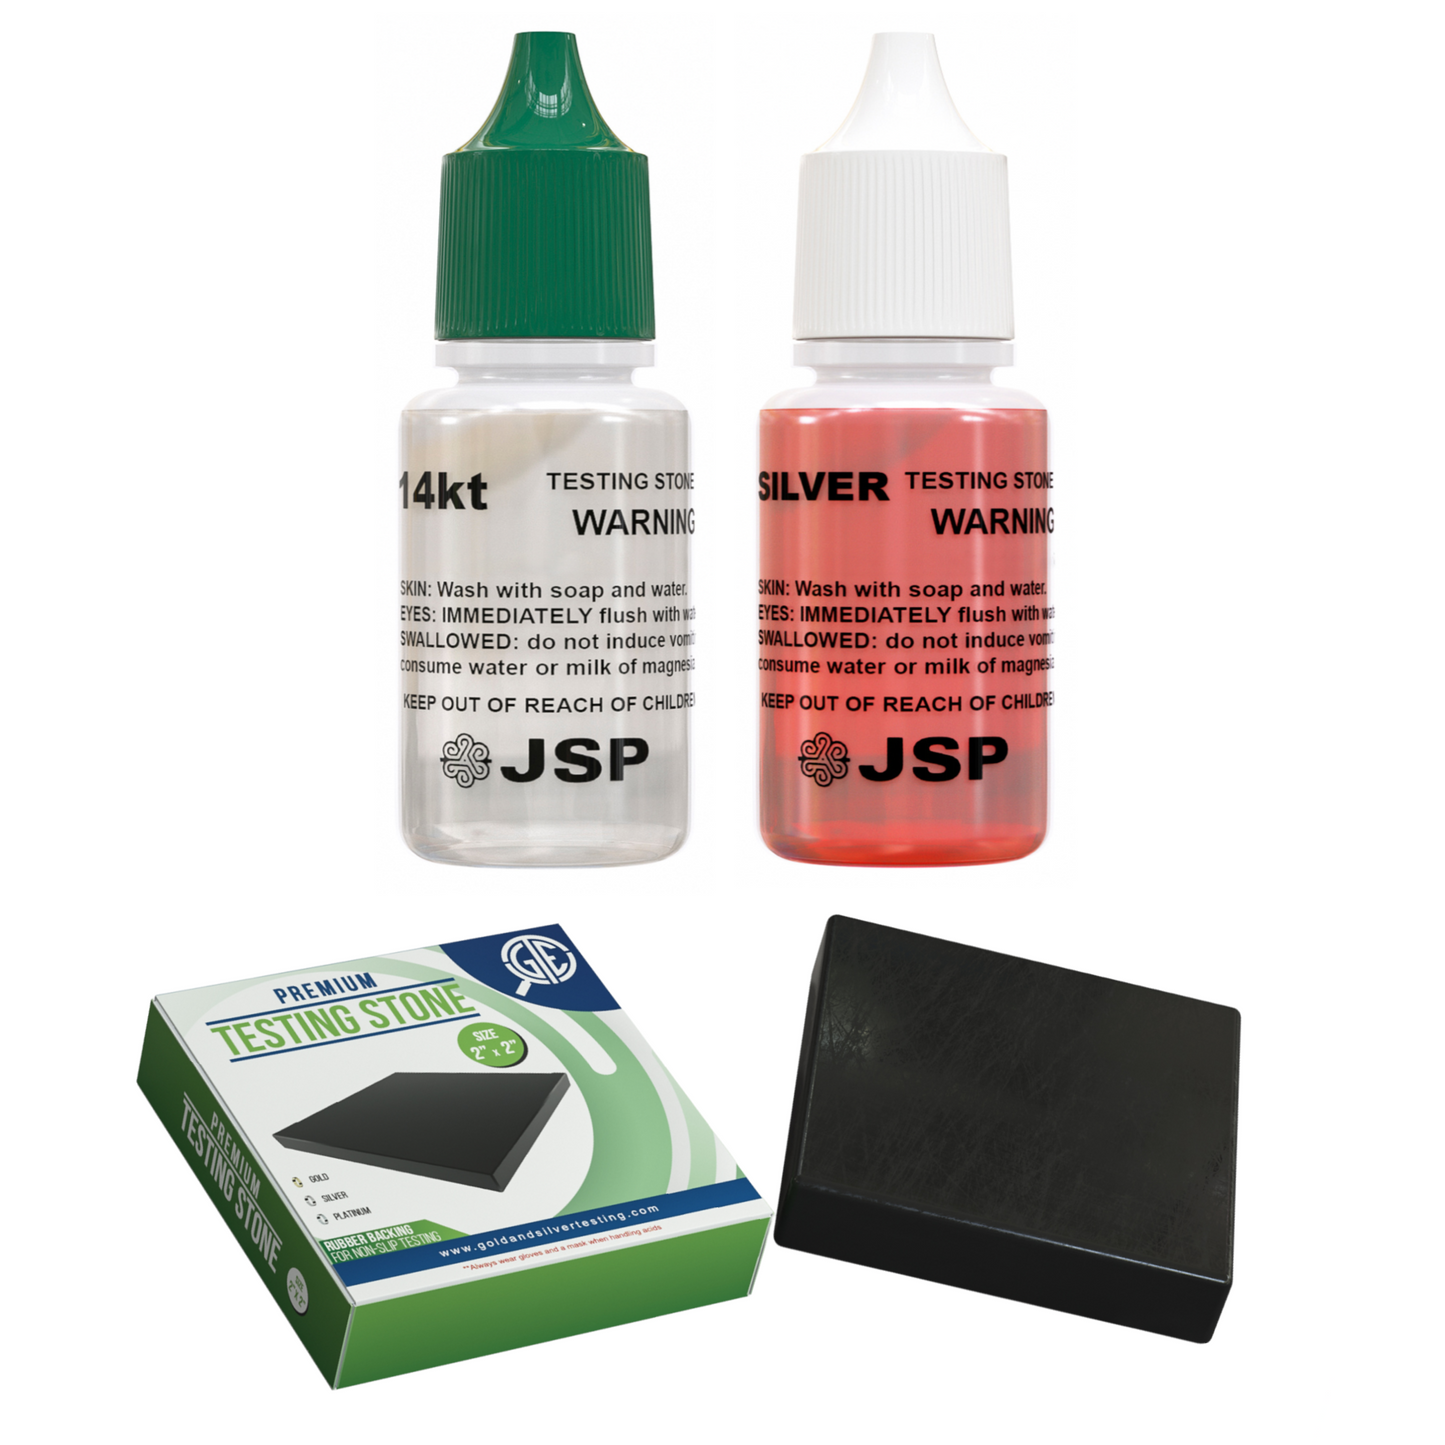 JSP Silver & 14K Gold Jewelry Acid Test Apprail Kit Detect 999 925 Sterling Solution with GTE Scratch Stone for Precious Metals